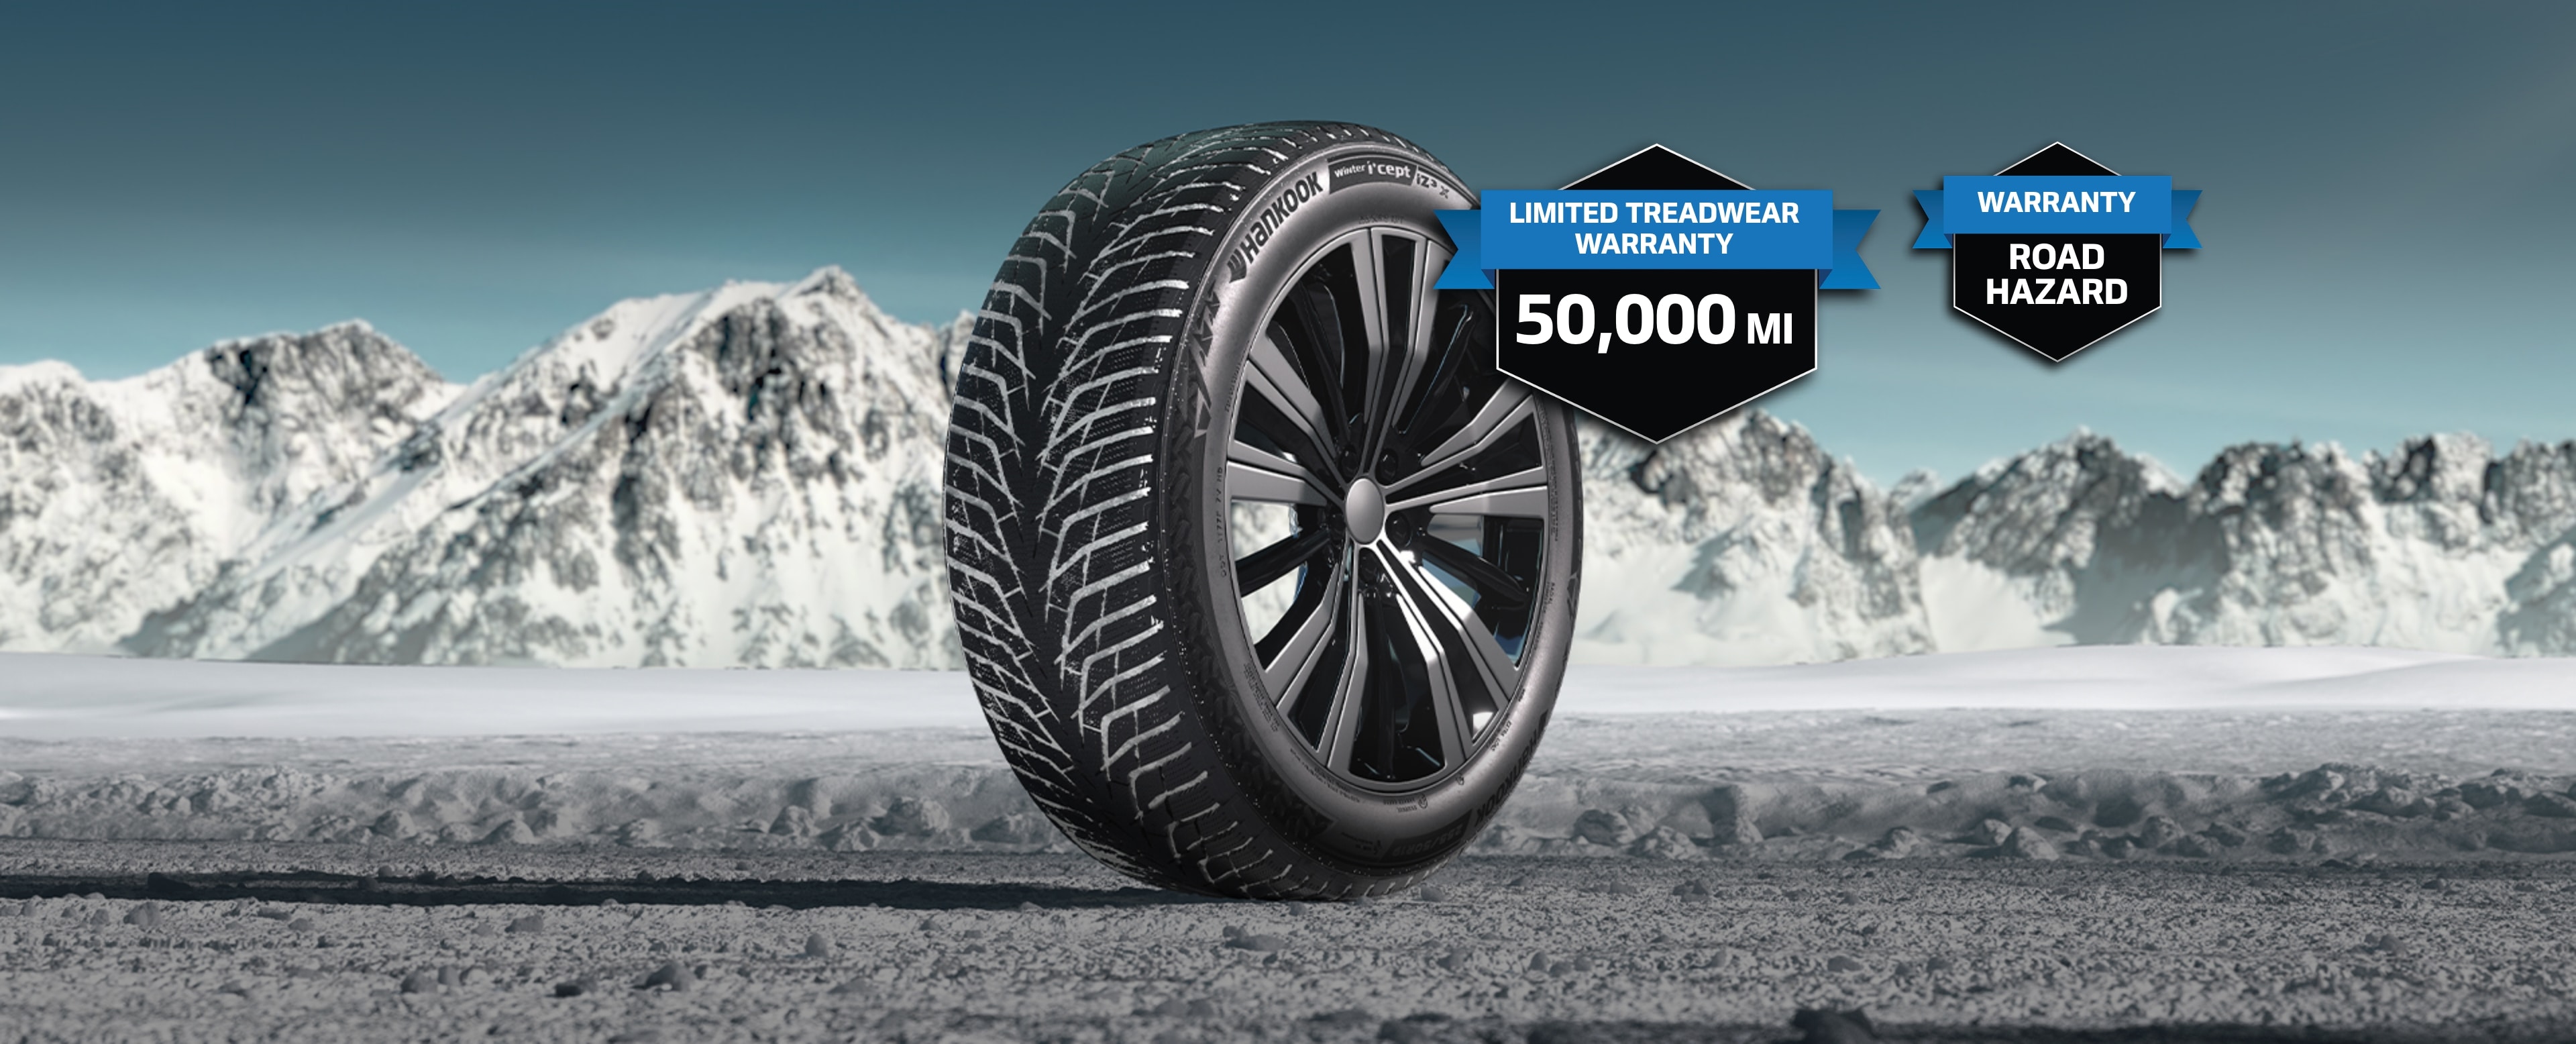 Hankook Tire & Technology-Tires-Winter I Cept-Winter I Cept IZ2-W616-Optimized directional pattern design for maximum studless safety even in the harshest winter conditions